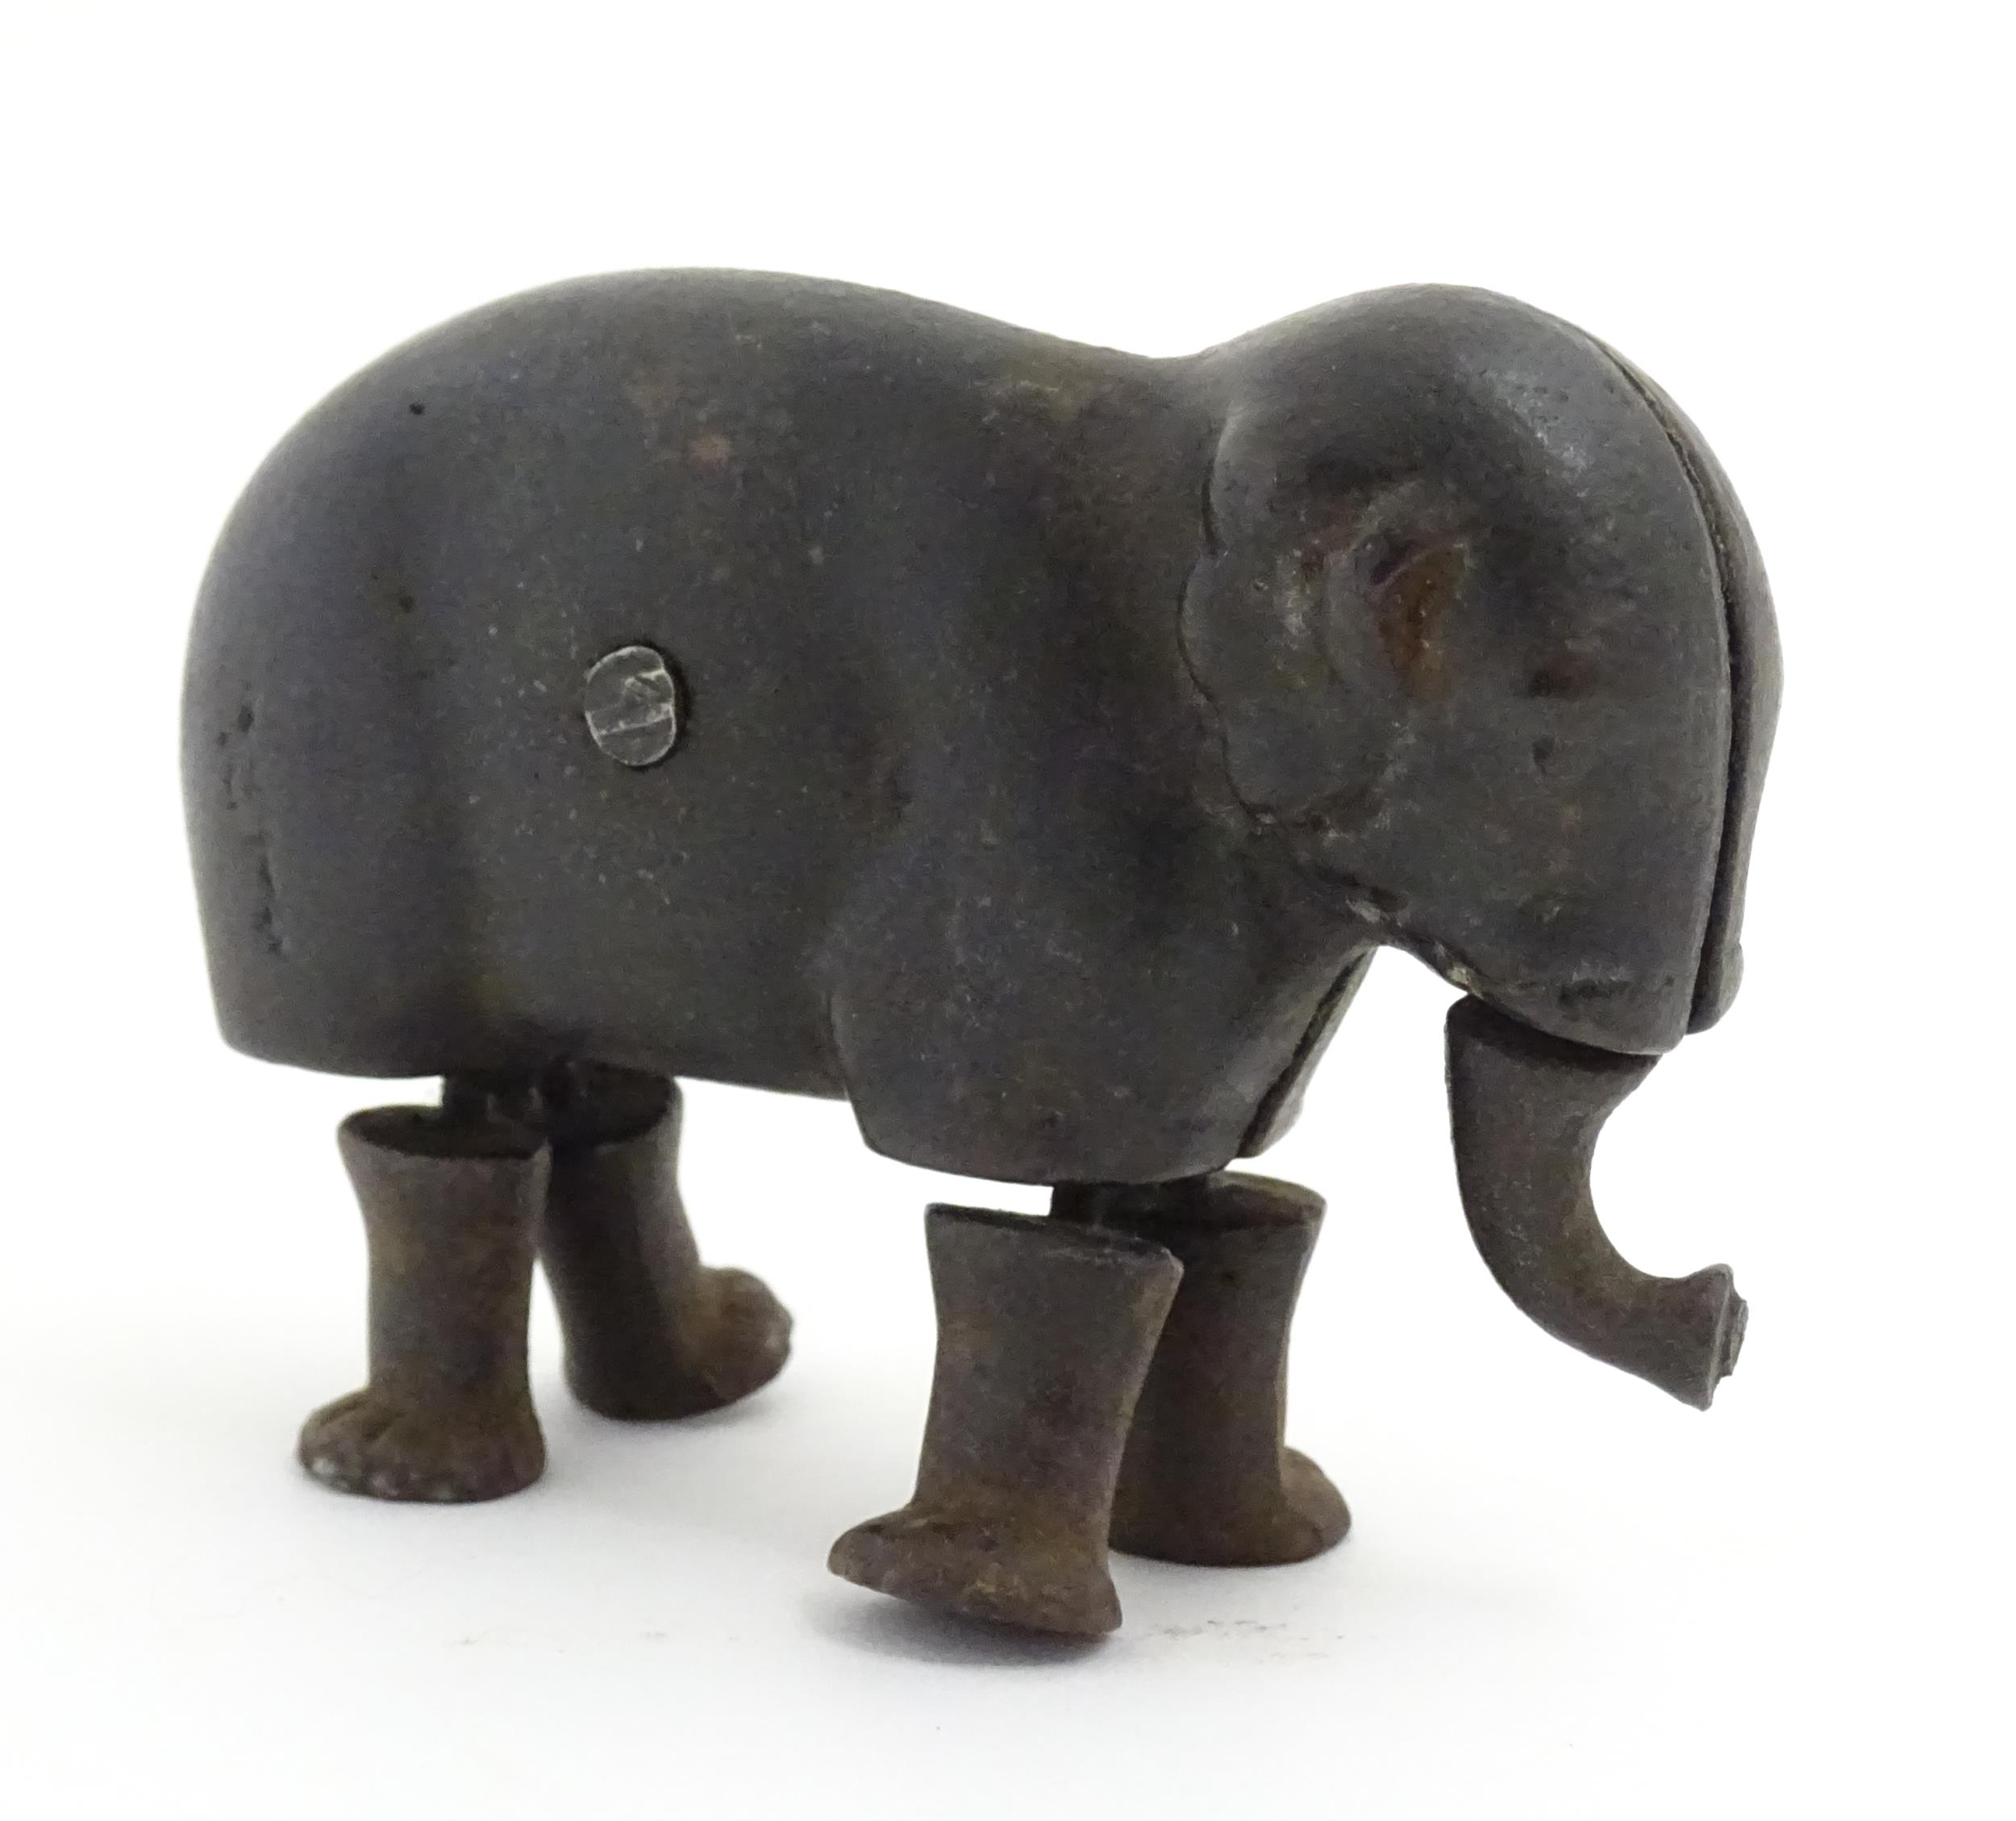 Toy: A late 19thC cast iron walking elephant toy with articulated legs and trunk, by the Ives Toy - Bild 6 aus 7